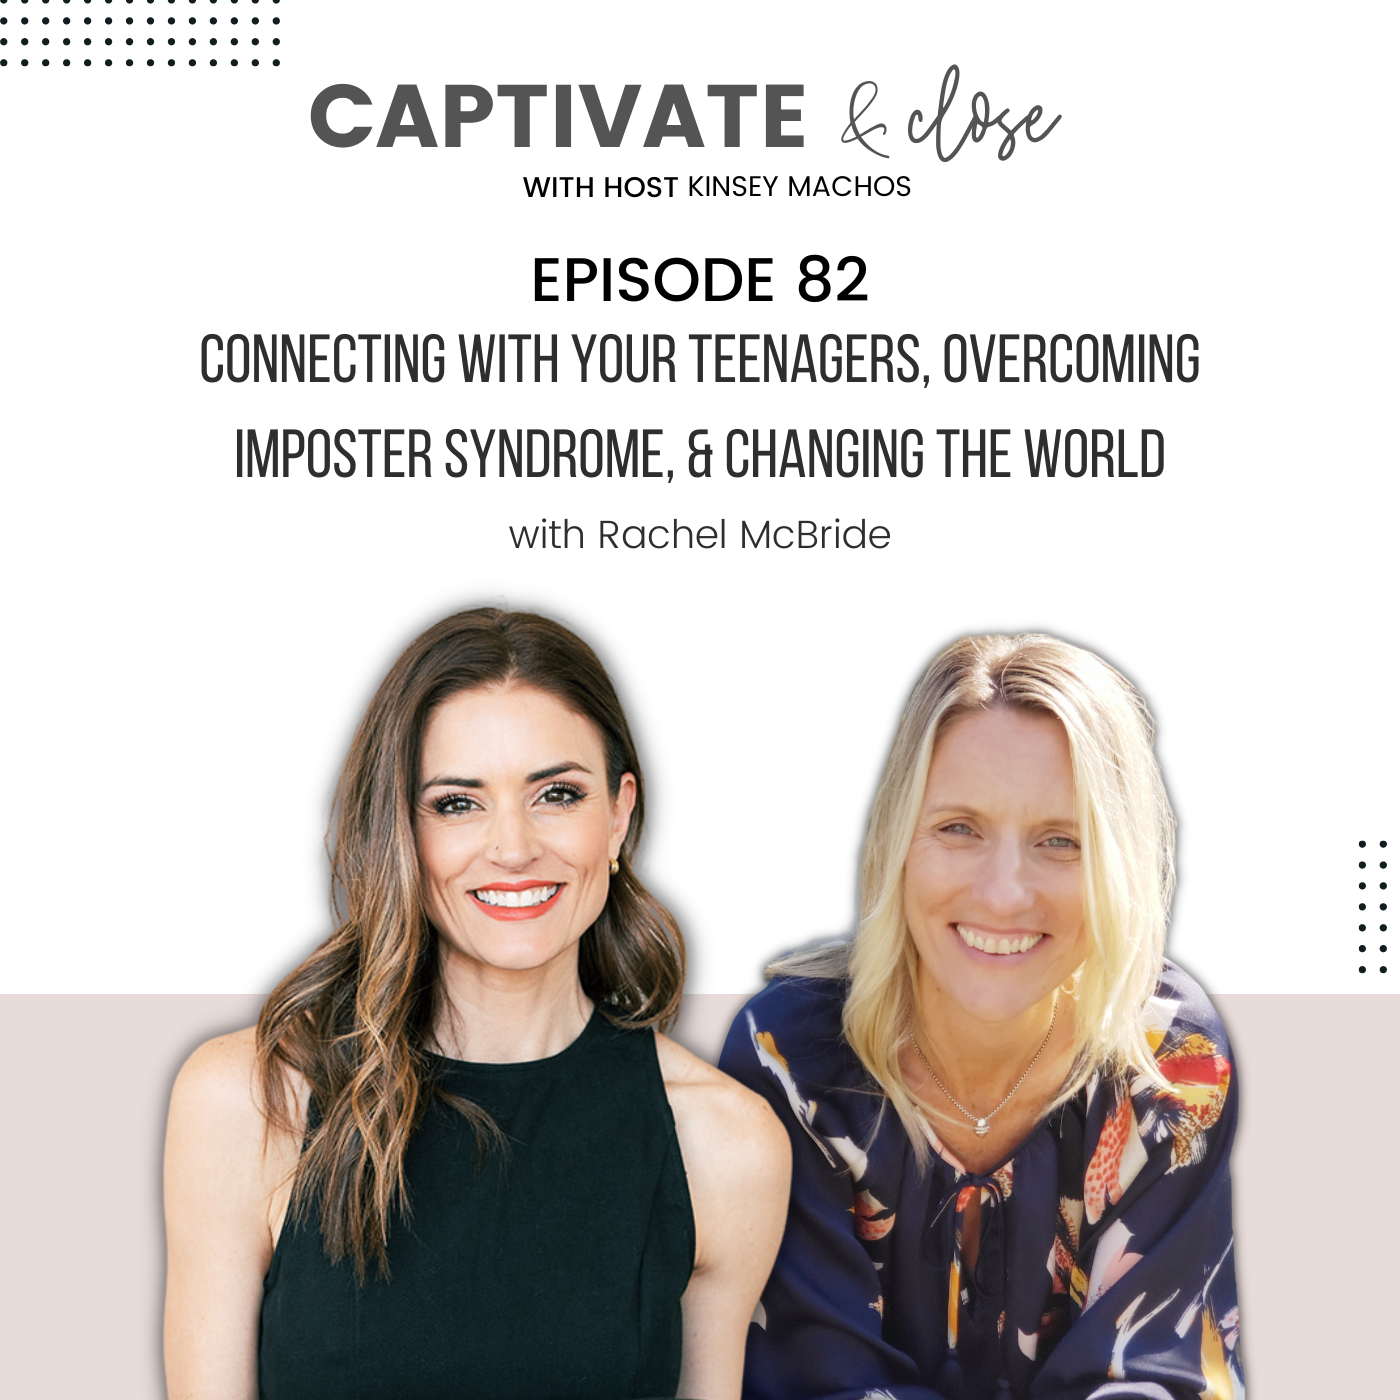 Connecting With Your Teenagers, Overcoming Imposter Syndrome, & Changing The World With Rachel McBride